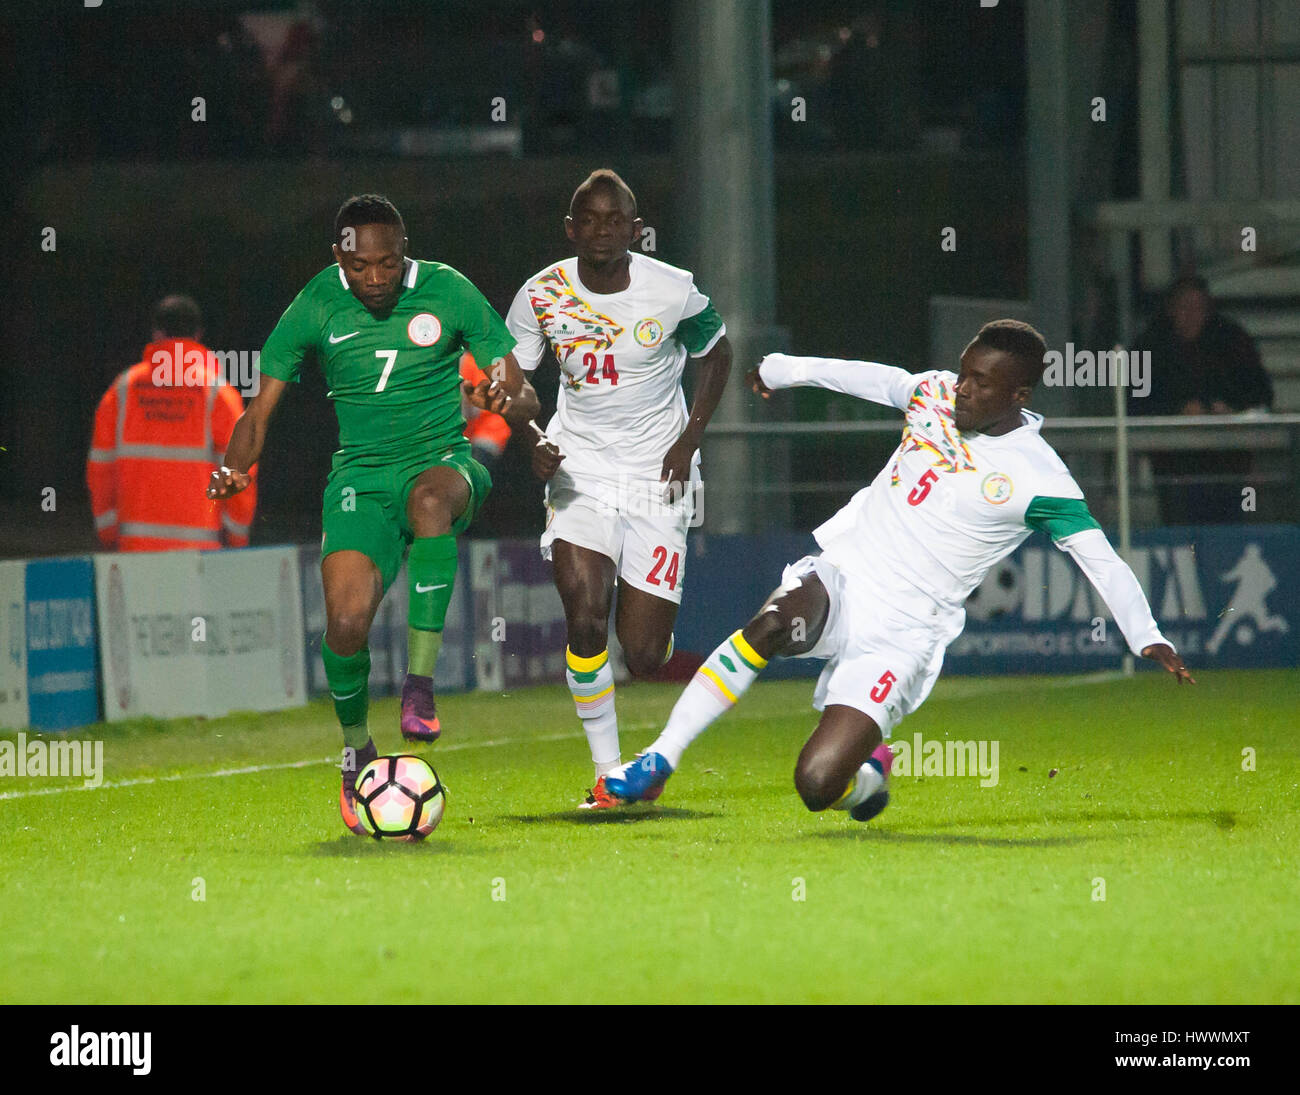 The Hive, Barnet,  England. 23rd March 2017. Ahmed Musa of Nigeria (L) battles for the ball with Adama Mbengue & Idrissa Gana Gueye of Senegal during the International Friendly match between Nigeria and Senegal. Michael Tubi / Alamy Live News Stock Photo